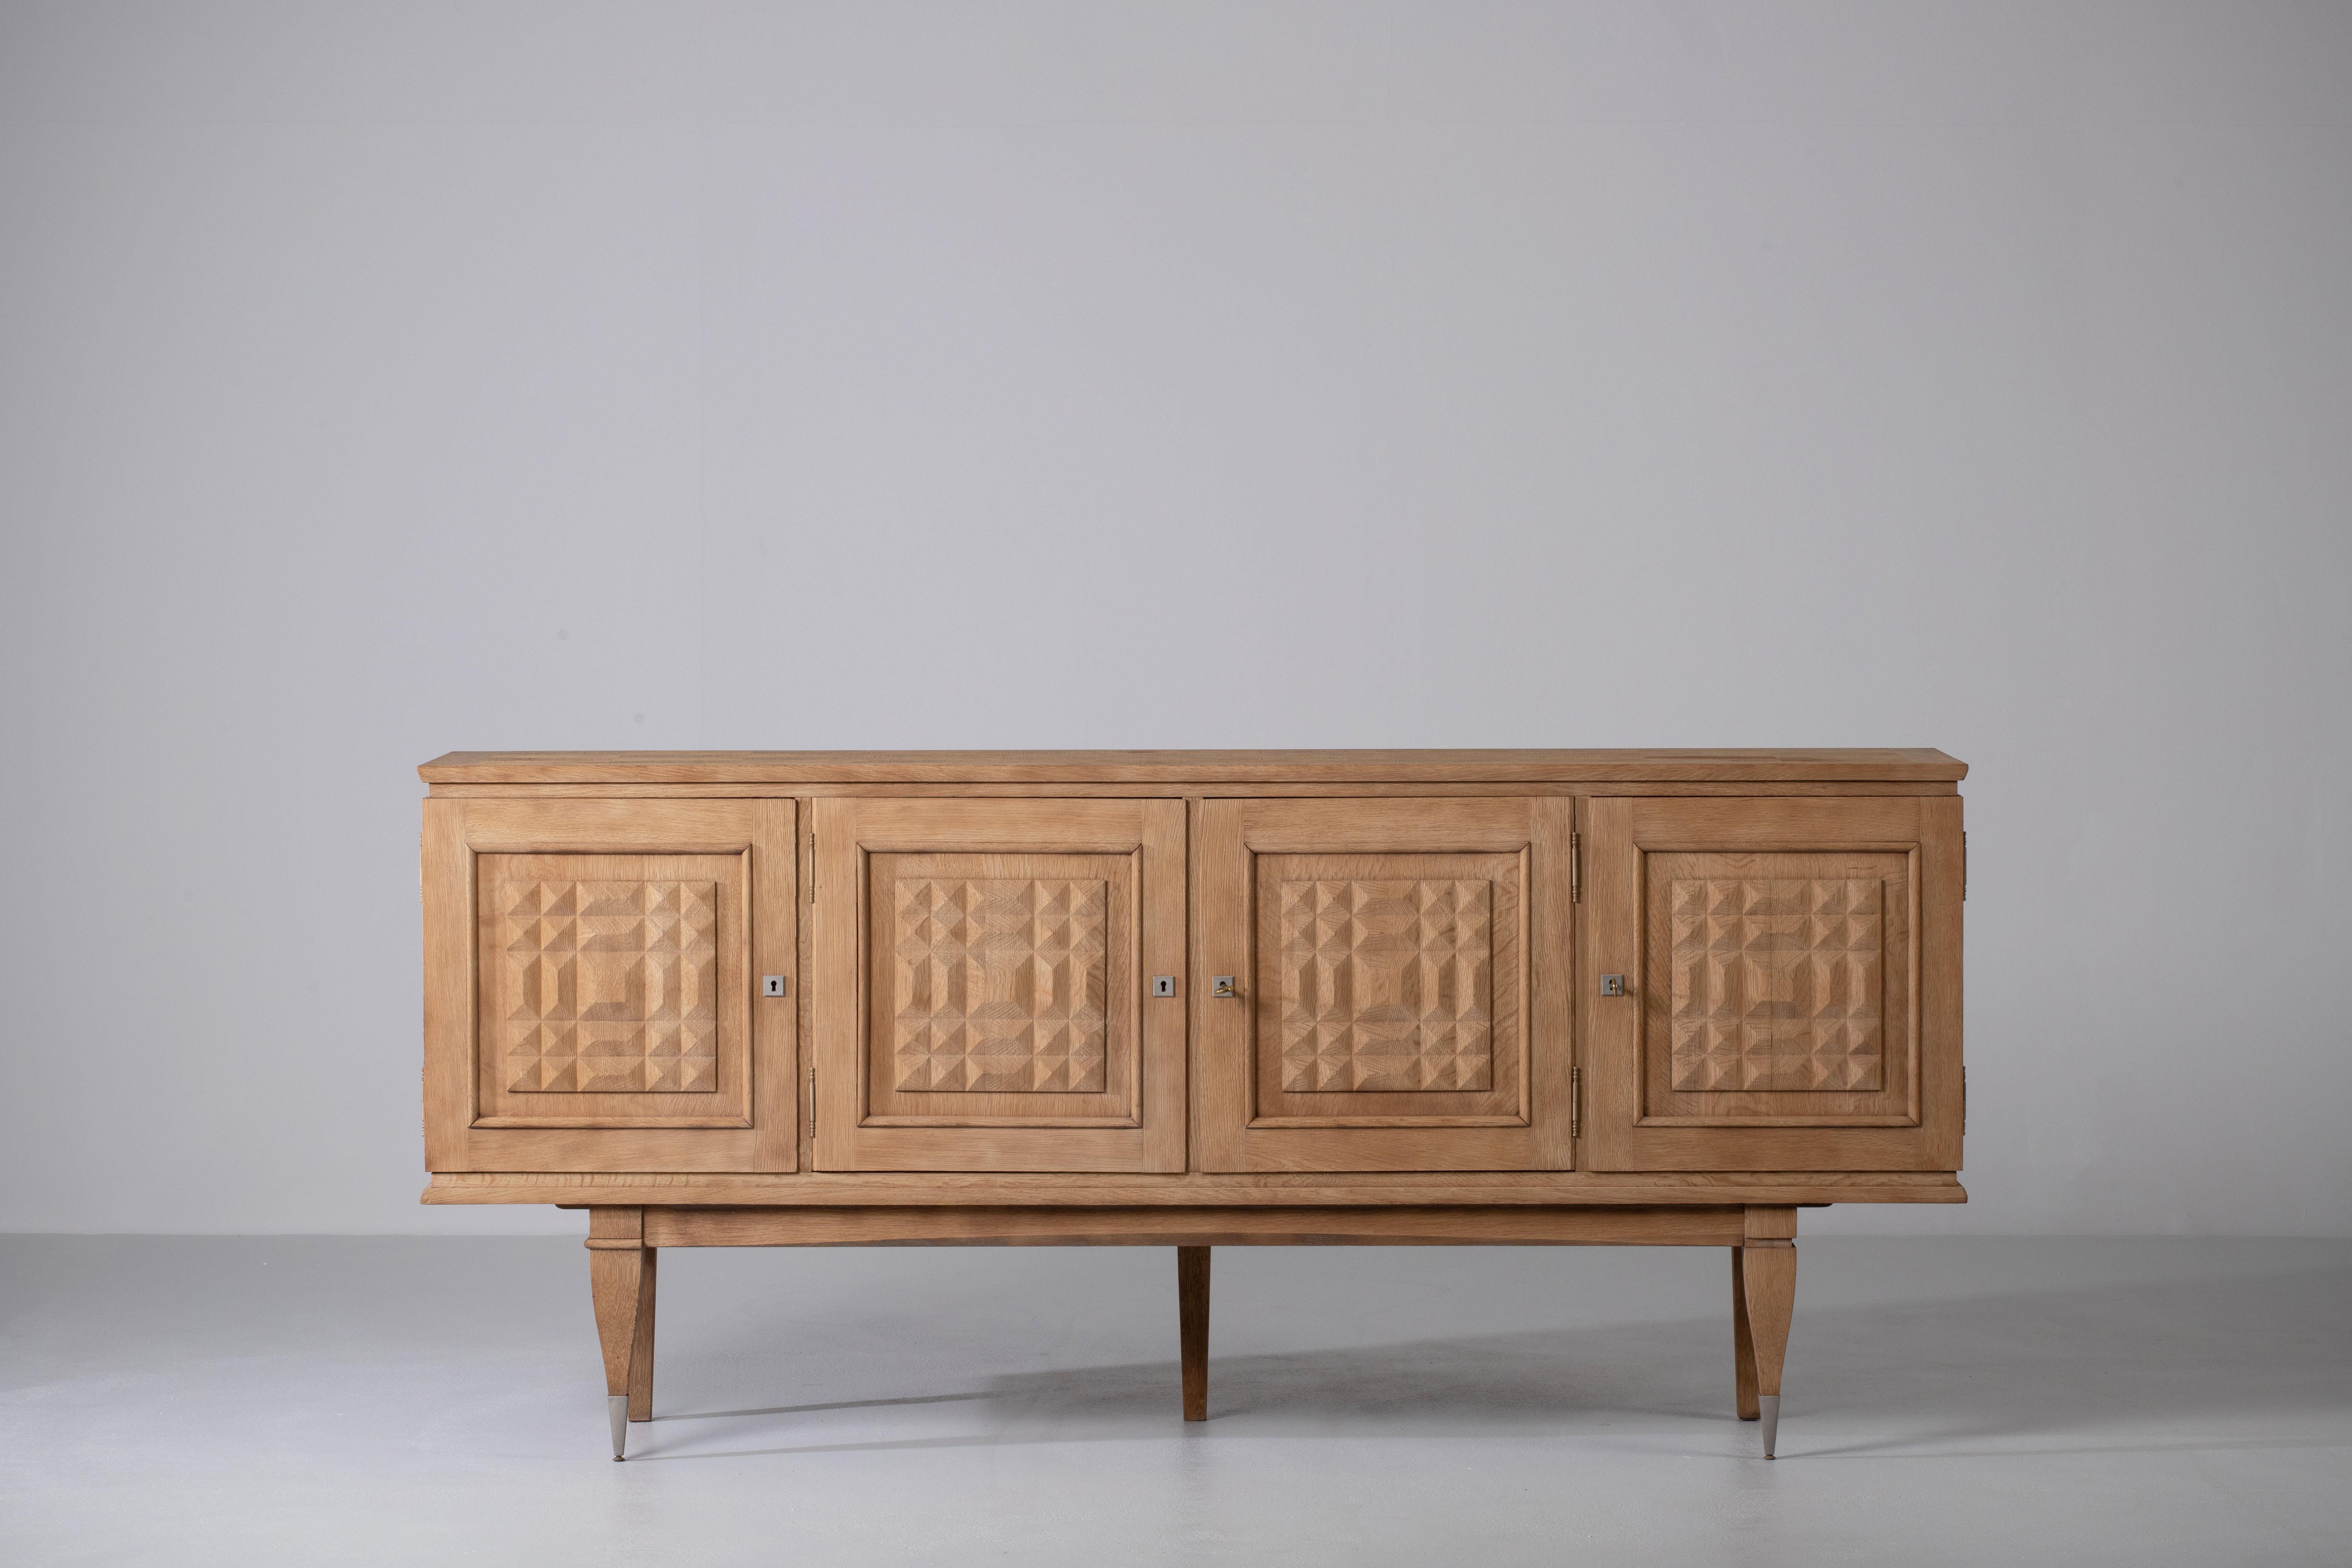 Credenza, solid oak, France, 1940s.
Large Art Deco Brutalist sideboard. 
The credenza consists of two central drawers and three storage facilities and covered with very detailed designed doors. 
The refined wooden structures on the doors create a